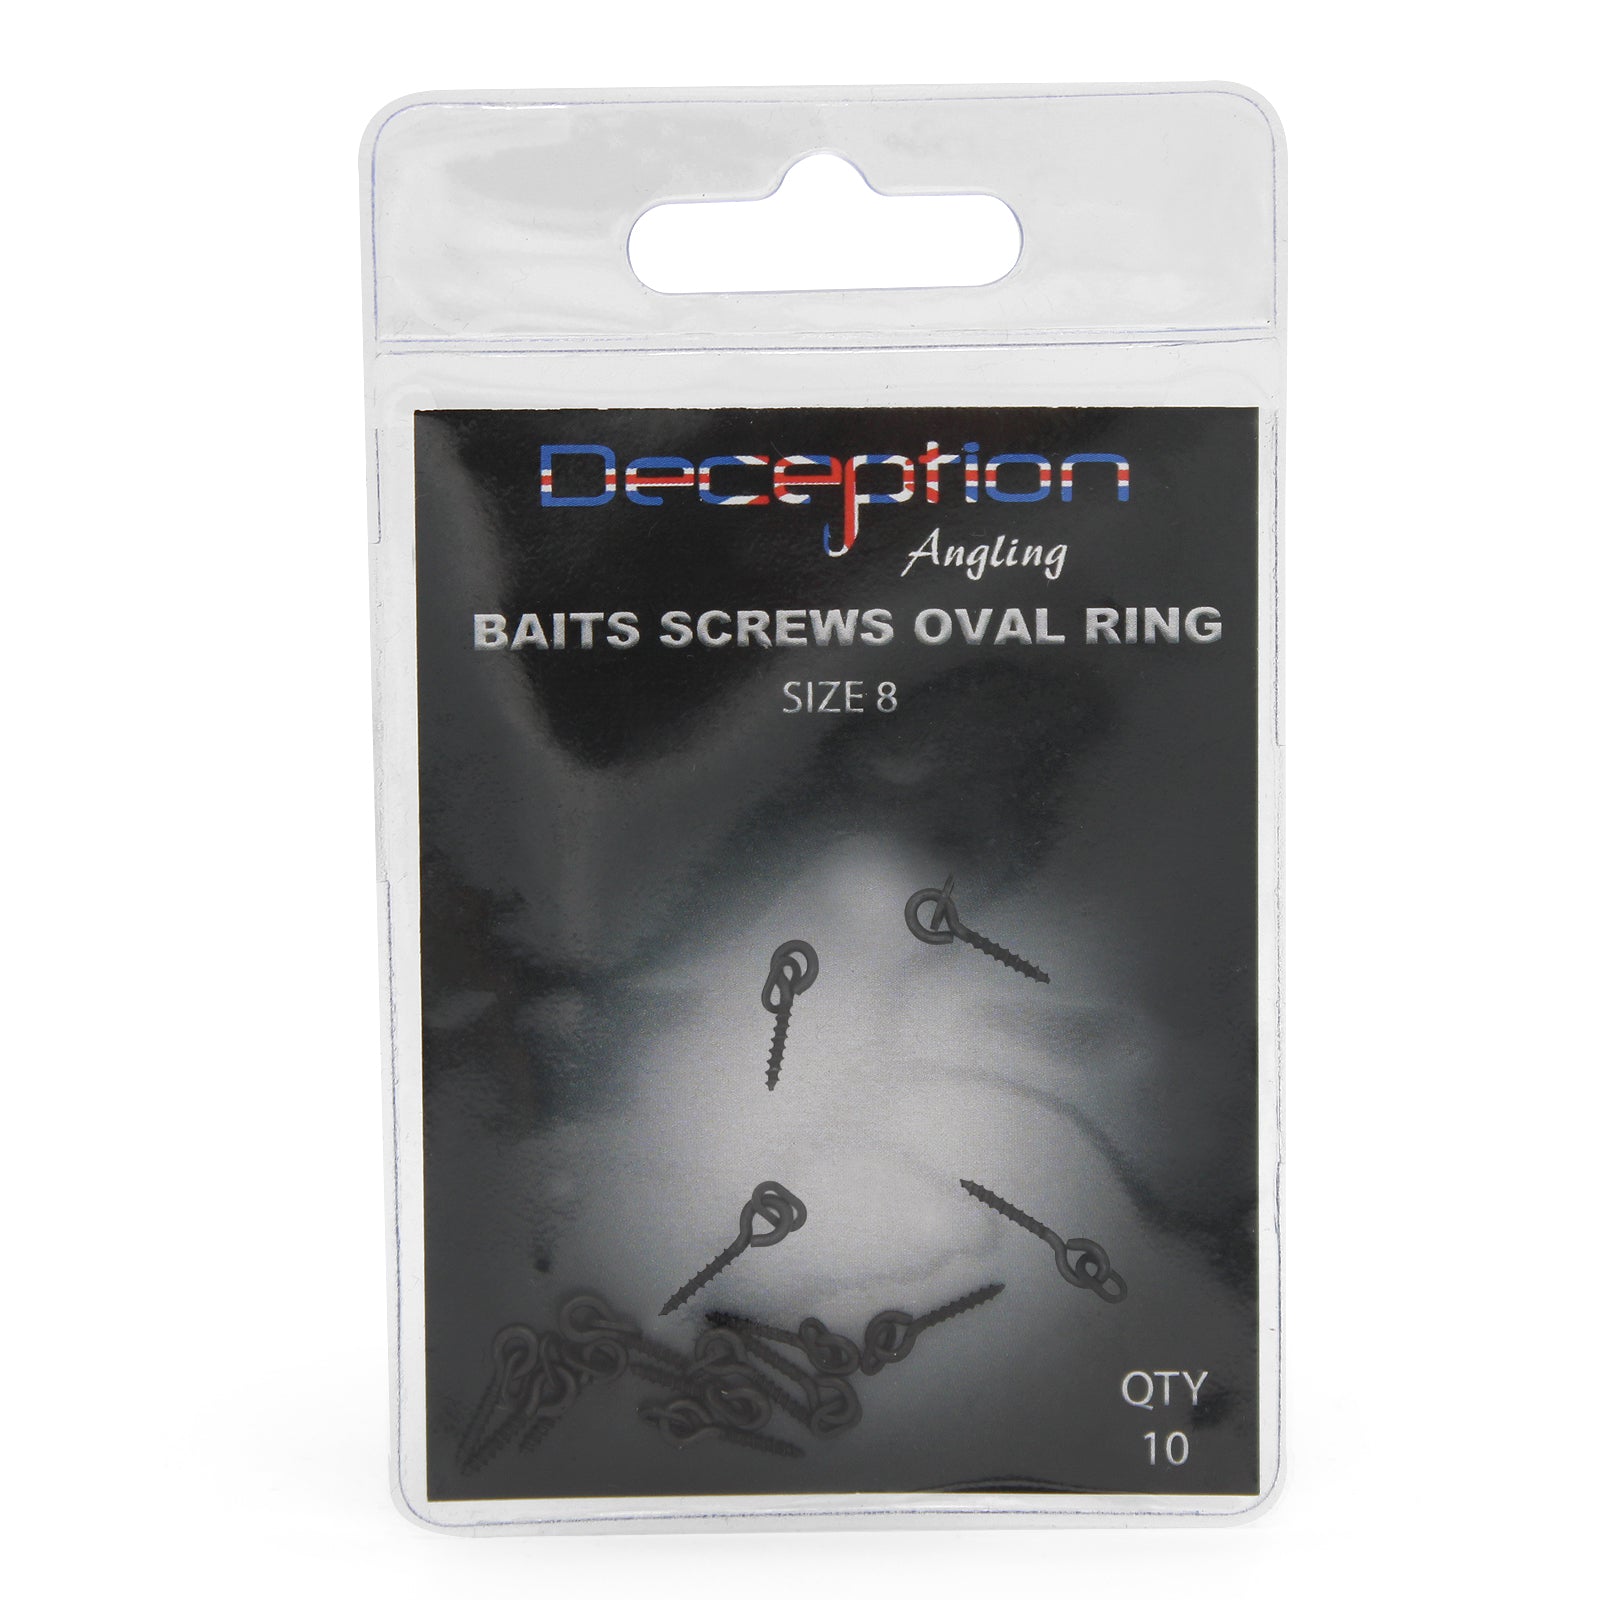 Deception Angling Bait Screws with Oval Ring for Fishing Pack of 10